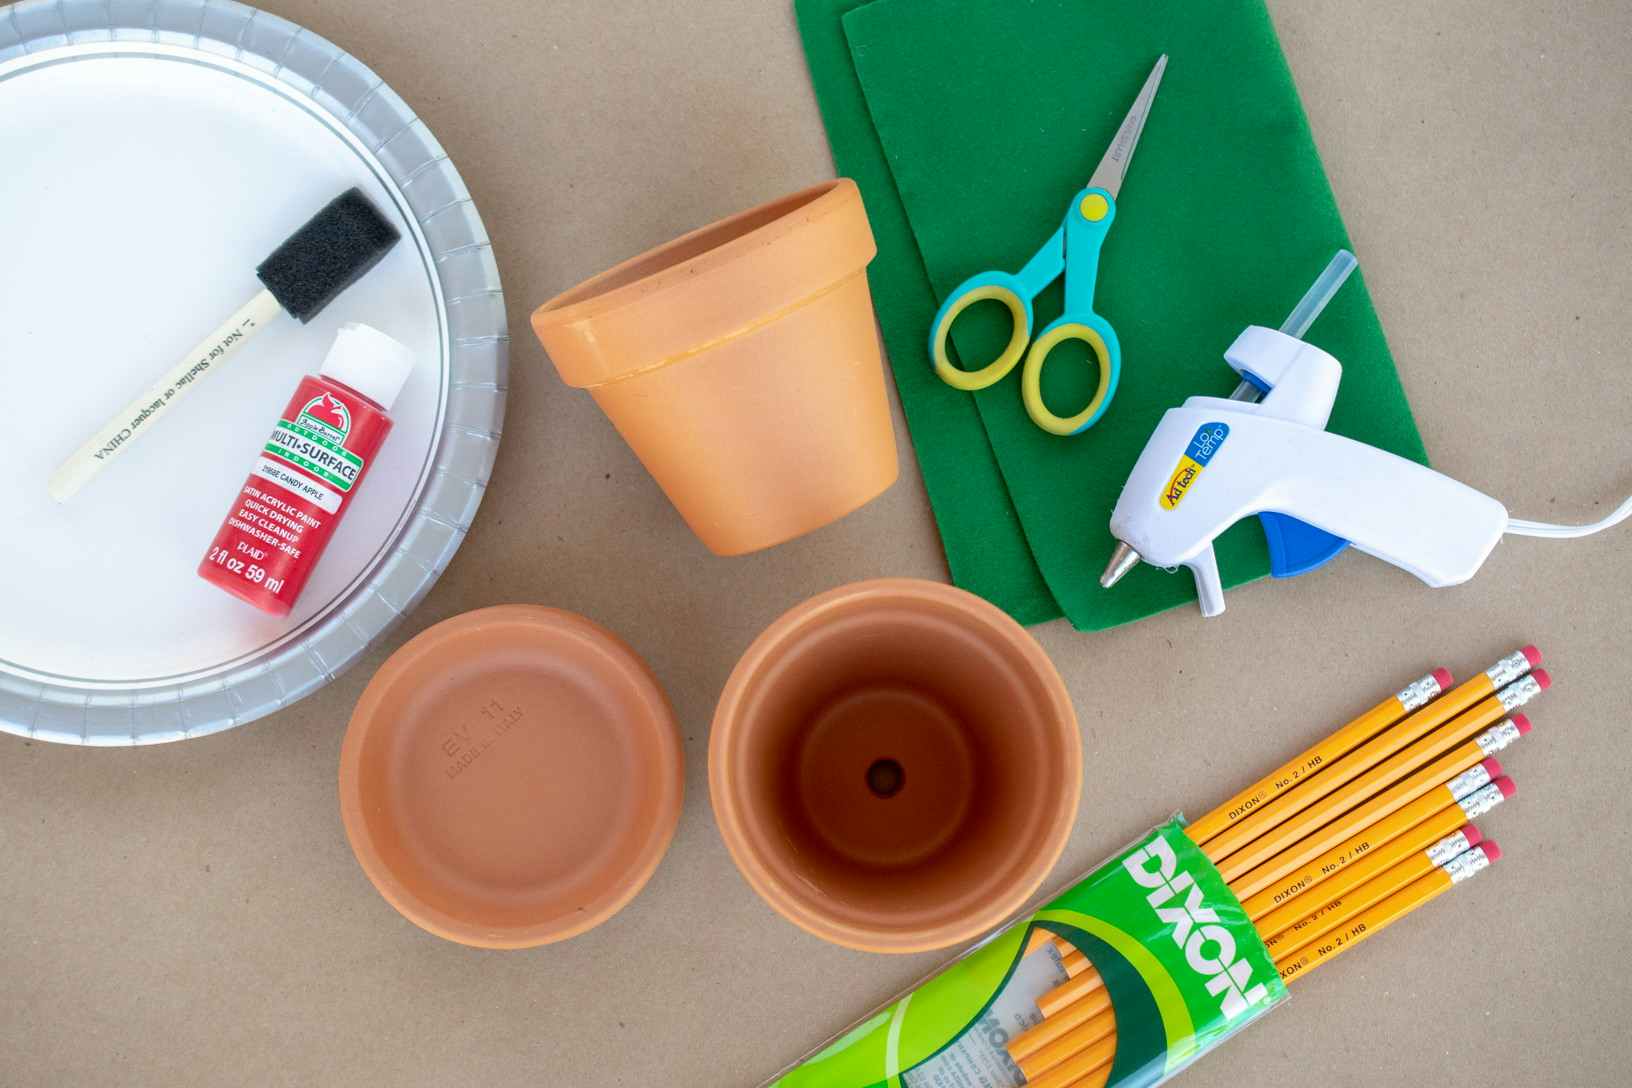 paper plates, paint, terracotta pots, hot glue, scissors and pencils laid out on a table.